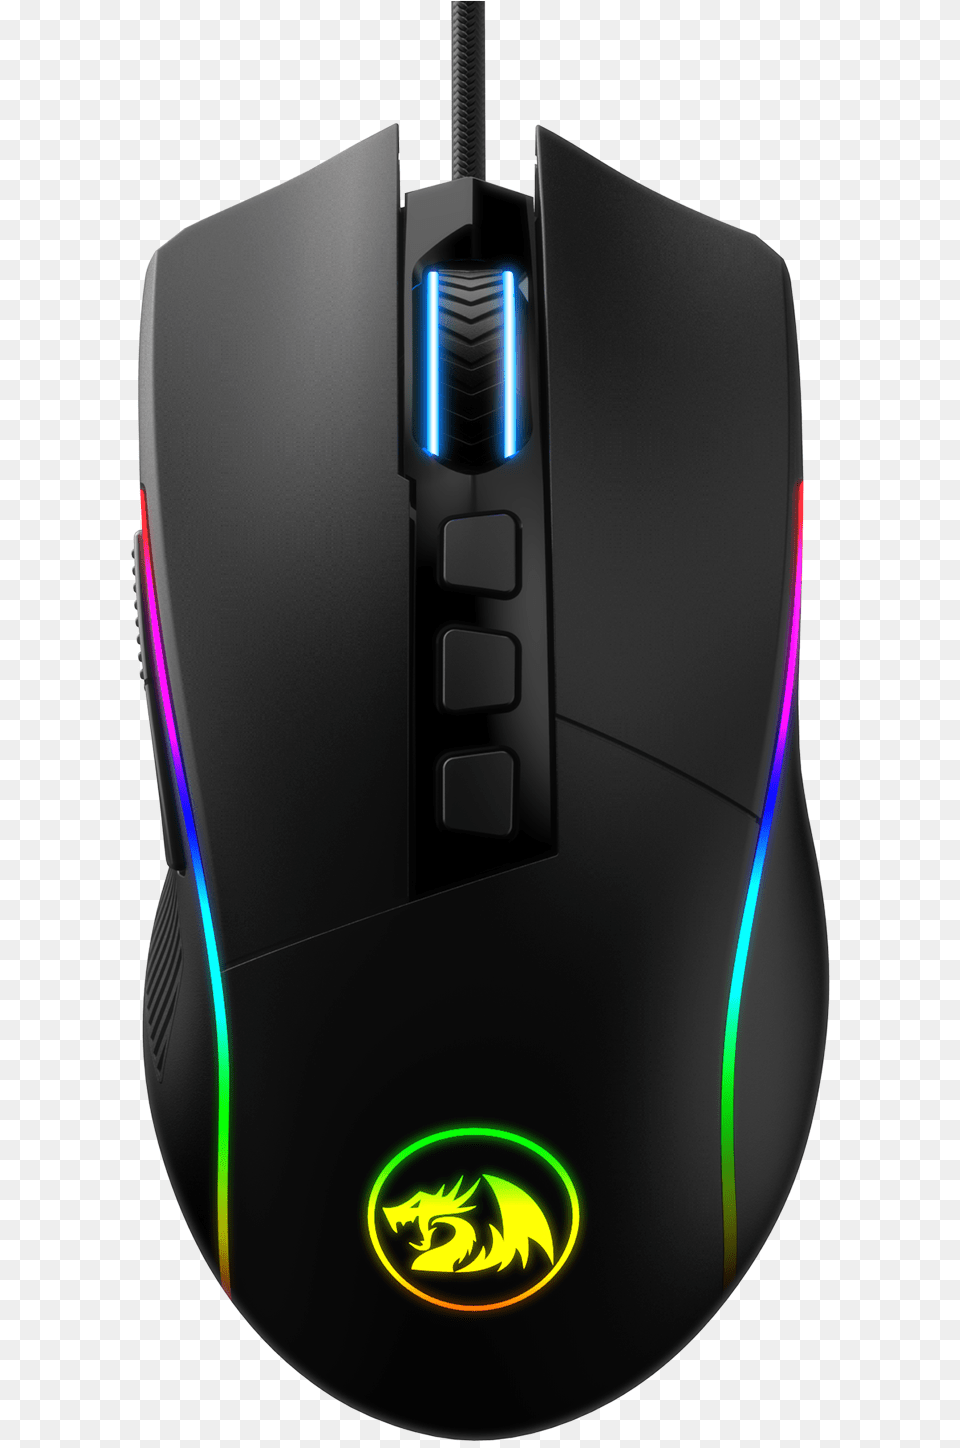 Redragon M721 Pro Lonewolf2 Gaming Mouse Razer Chroma Mouse, Computer Hardware, Electronics, Hardware, Electrical Device Png Image